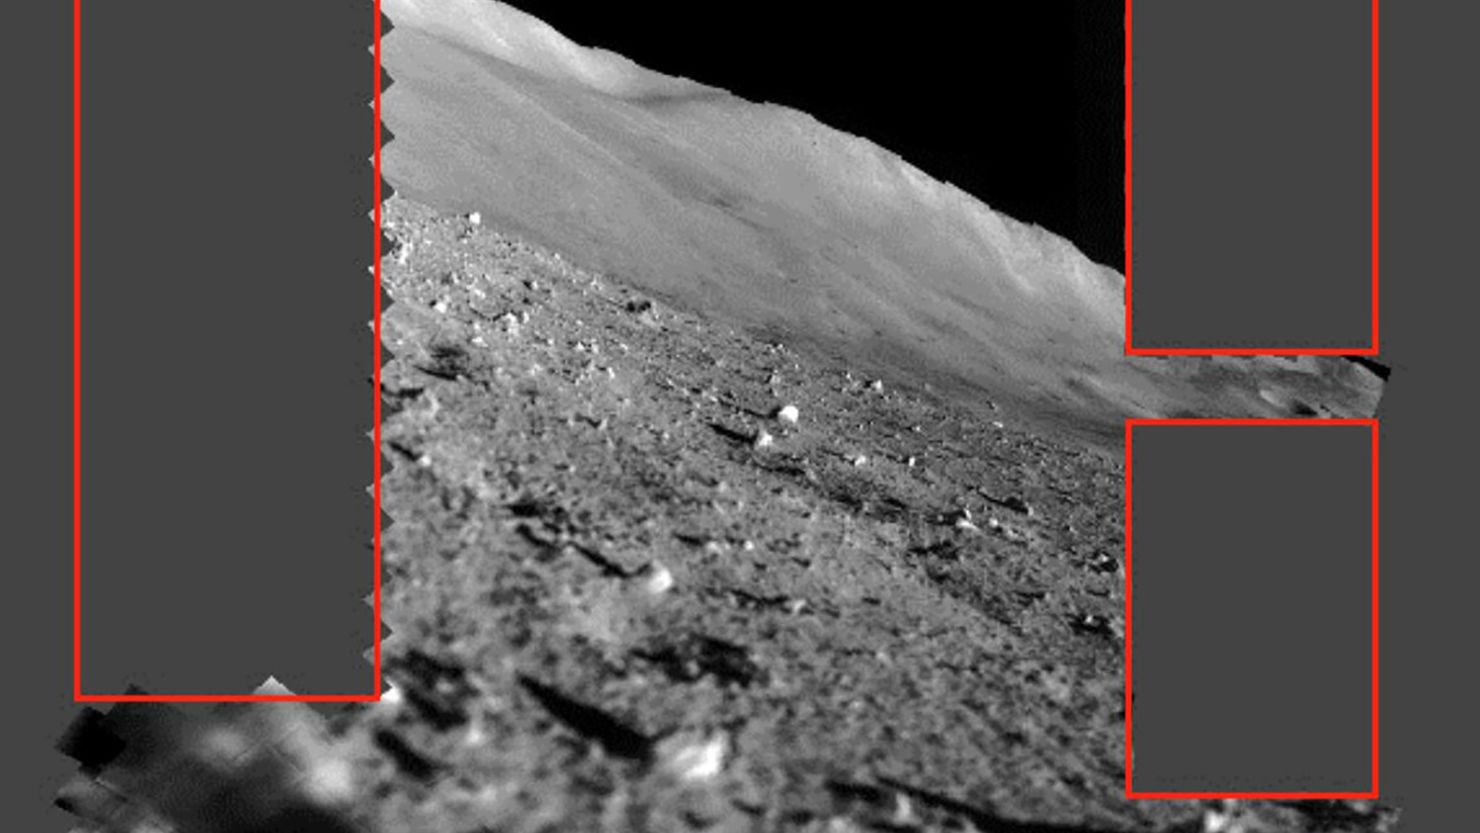 Japan's Moon Sniper captured new images of its landing site. The areas outlined in red will be imaged by the lander in the future.